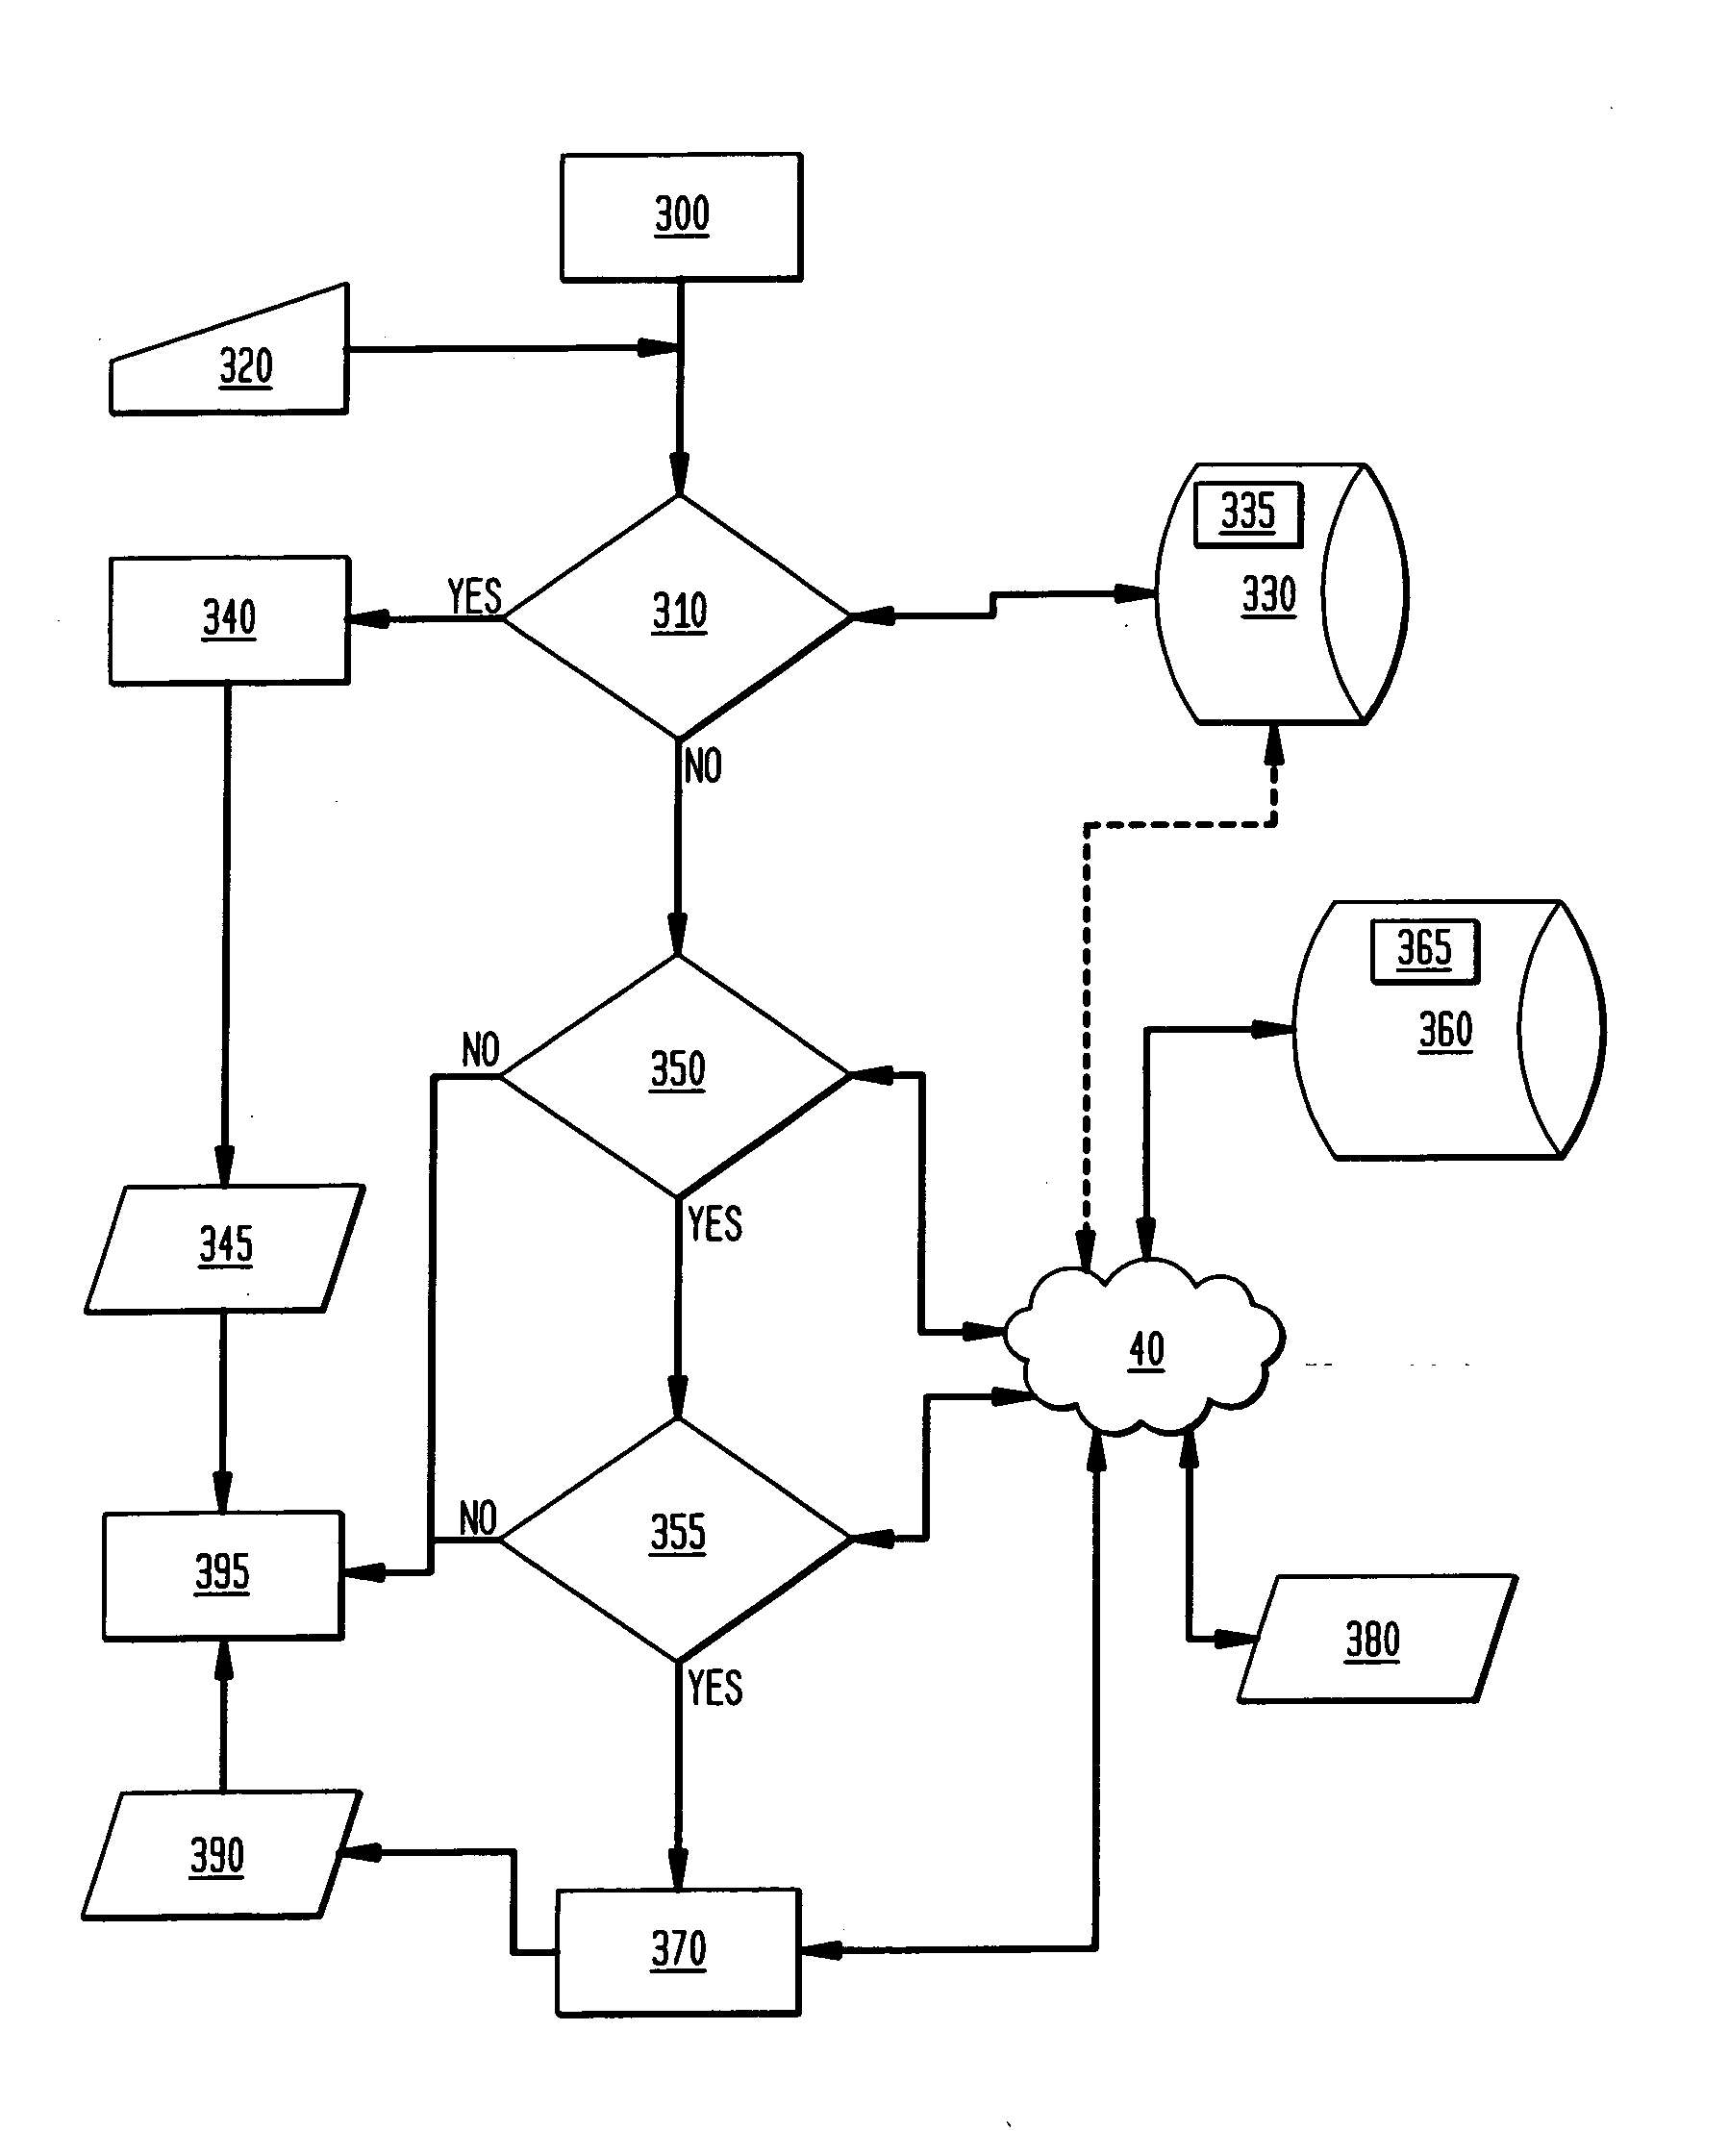 System and method for distributed media streaming and sharing